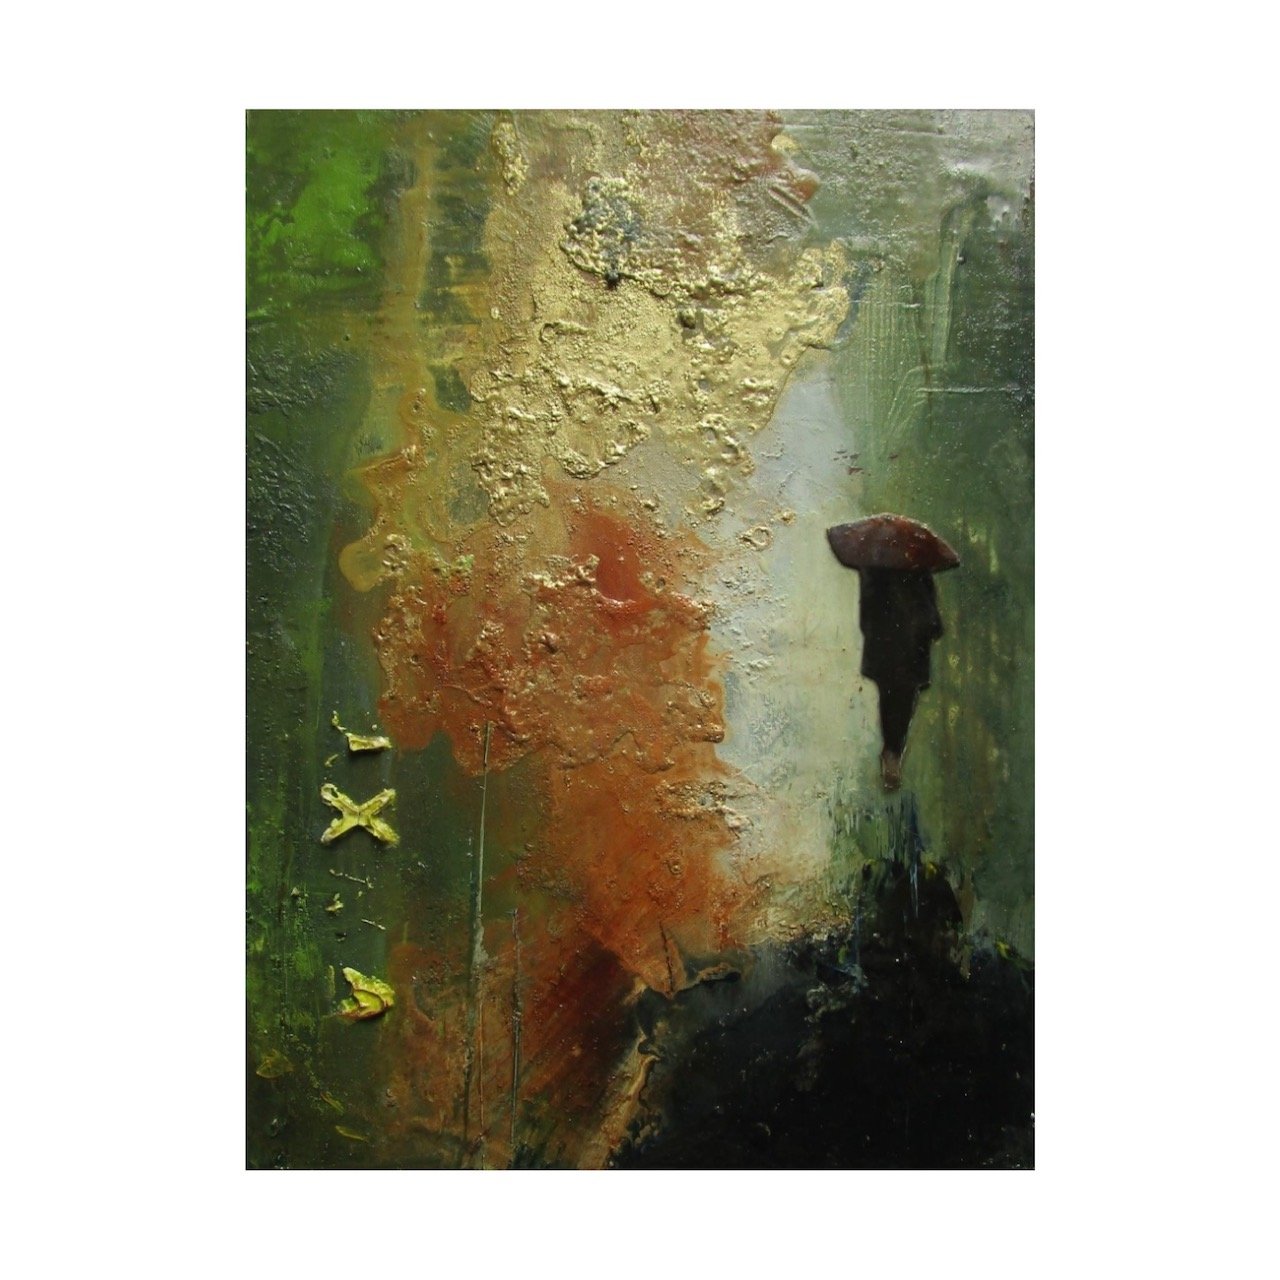 Above the Now - Mixed Media on Board - 16x12cm - wb.JPG